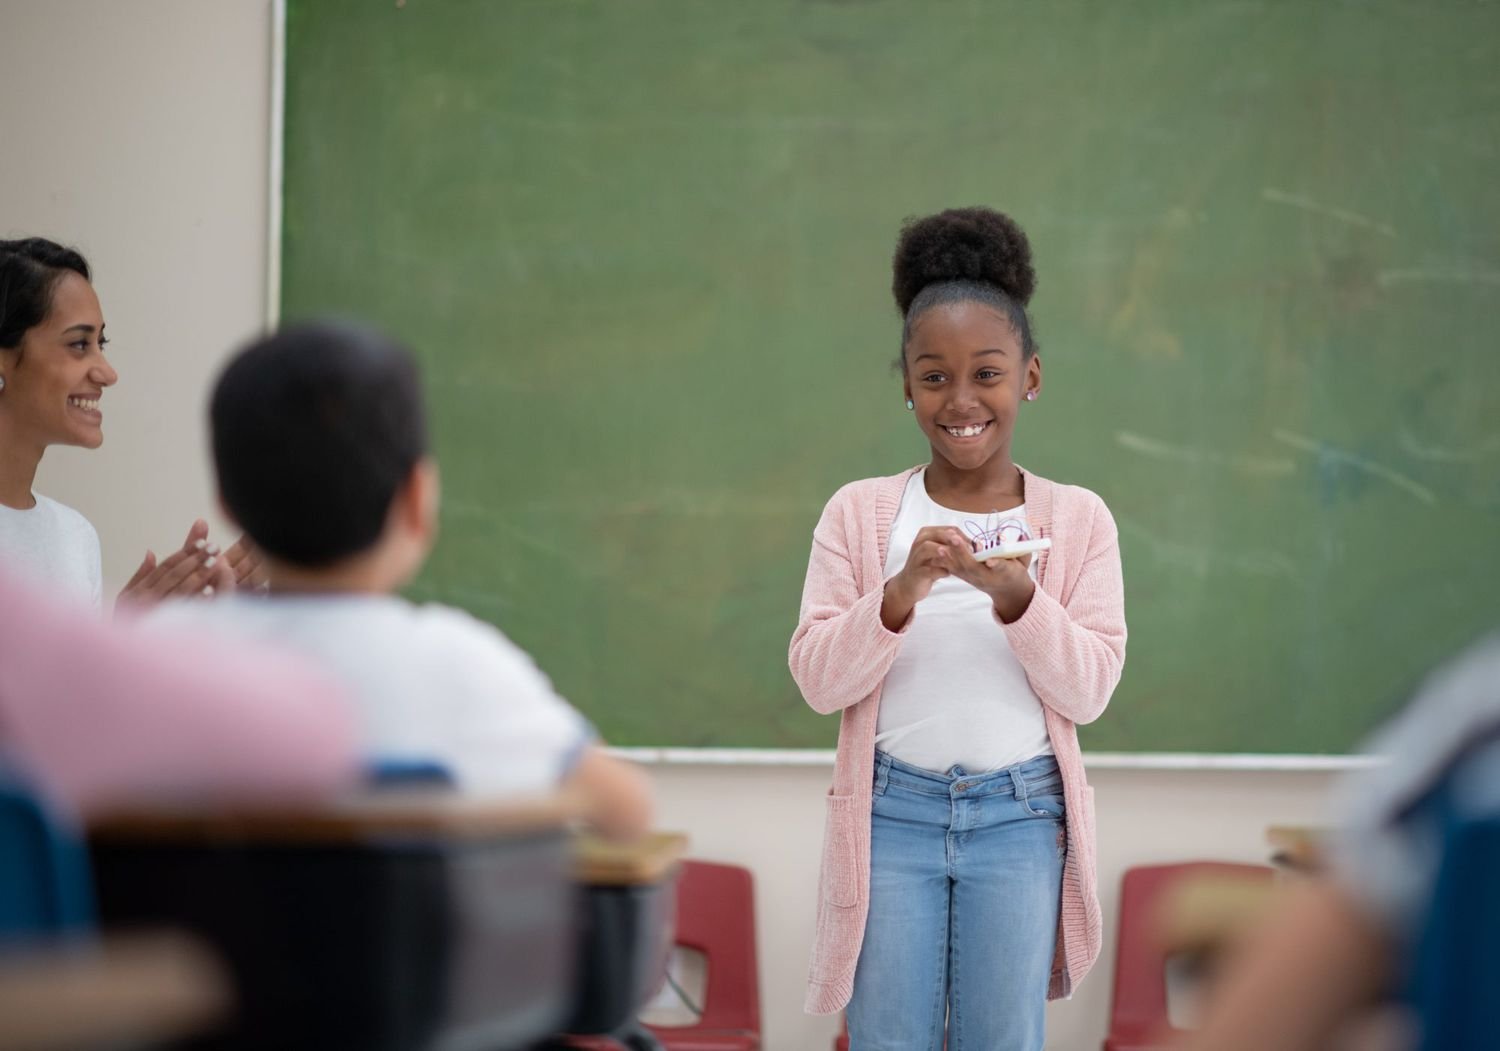 Legitimizing AAVE: Should Black Students Code-Switch in School?